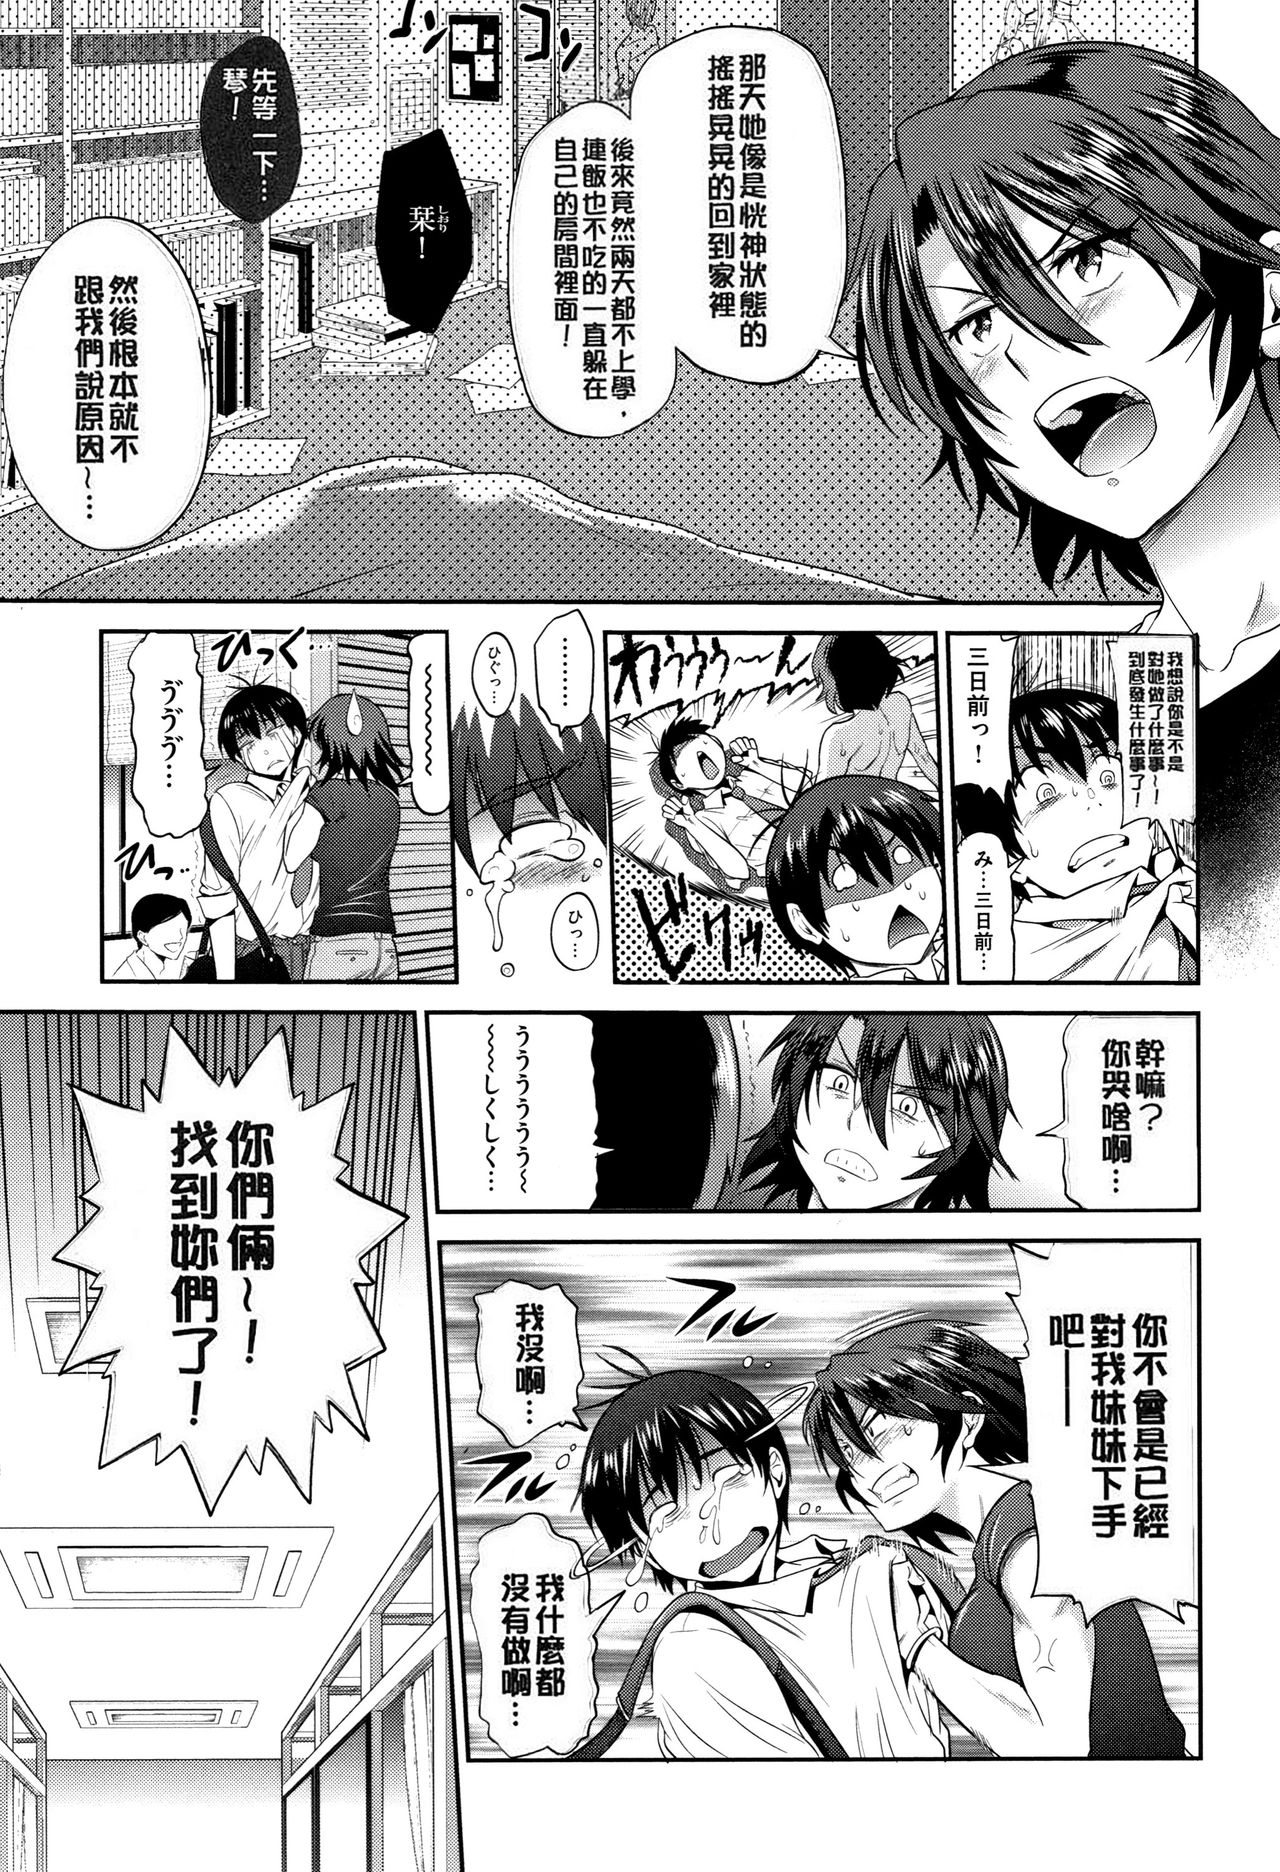 [DISTANCE] Jyoshi Luck! ~2 Years Later~ 2 [Chinese] [黑哥哥個人PS漢化版] page 50 full